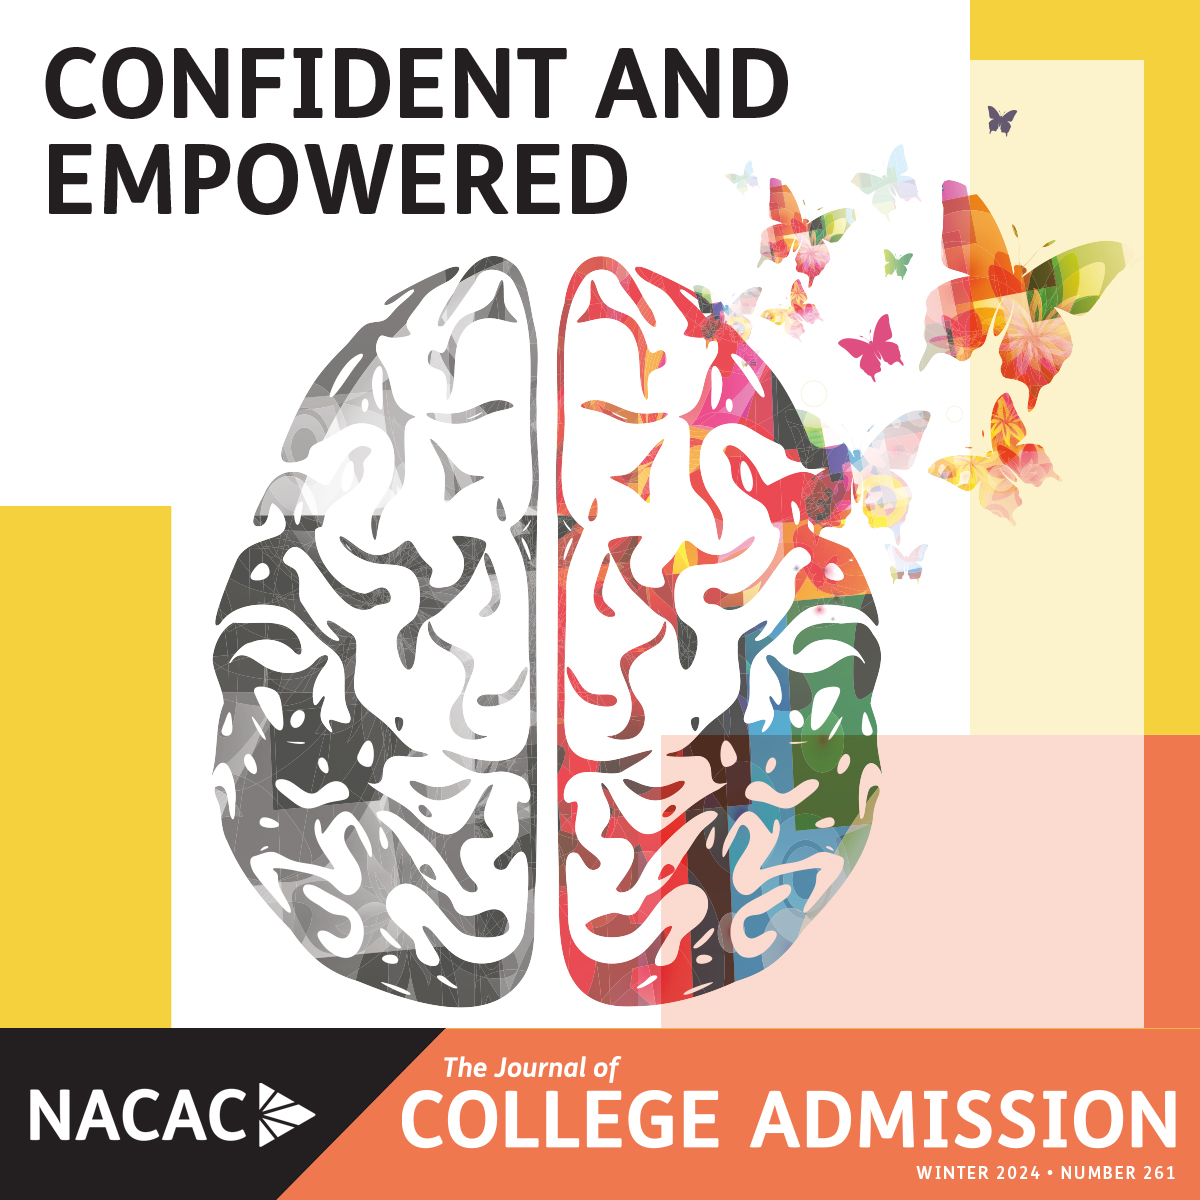 From the latest issue of The Journal of College Admission: The rate of #autism in the United States has grown considerably in recent decades. Here’s what counselors and colleges need to know as they work with these students. nacacnet.org/resources/news… #neurodiversity #NACAC